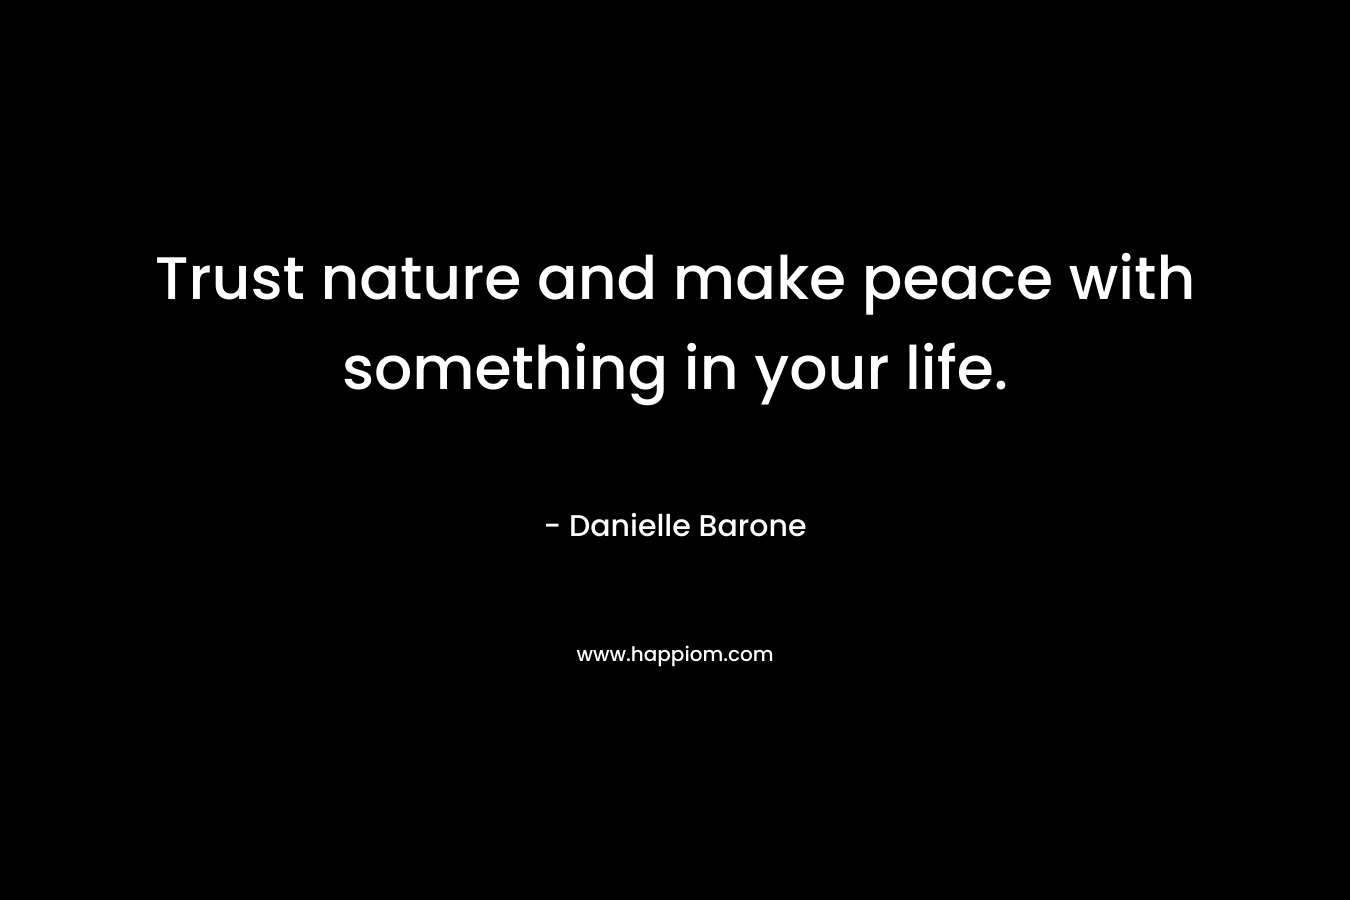 Trust nature and make peace with something in your life.